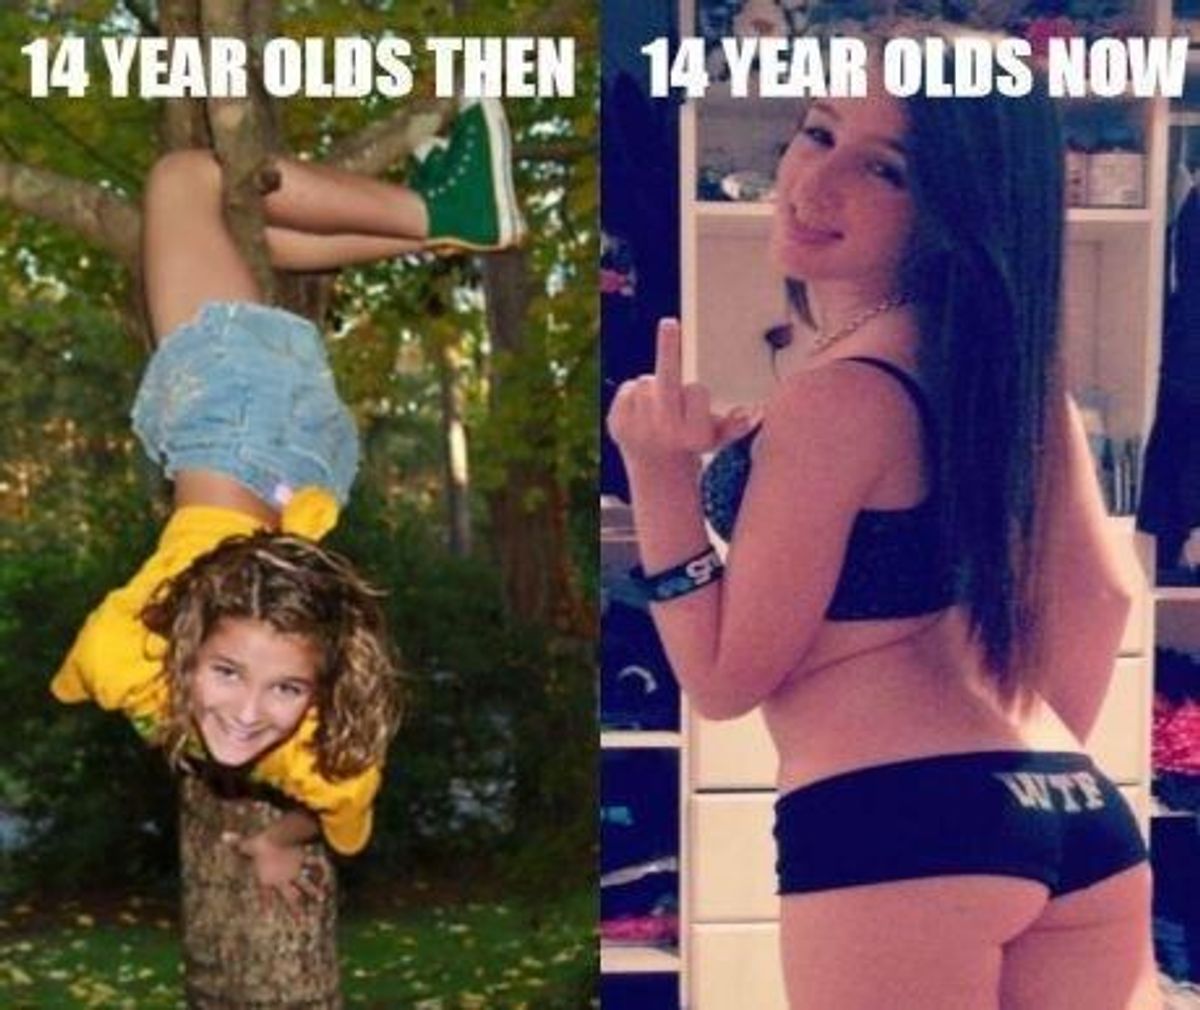 Why Does This Generation Of Teenagers Want To Grow Up So Quickly?